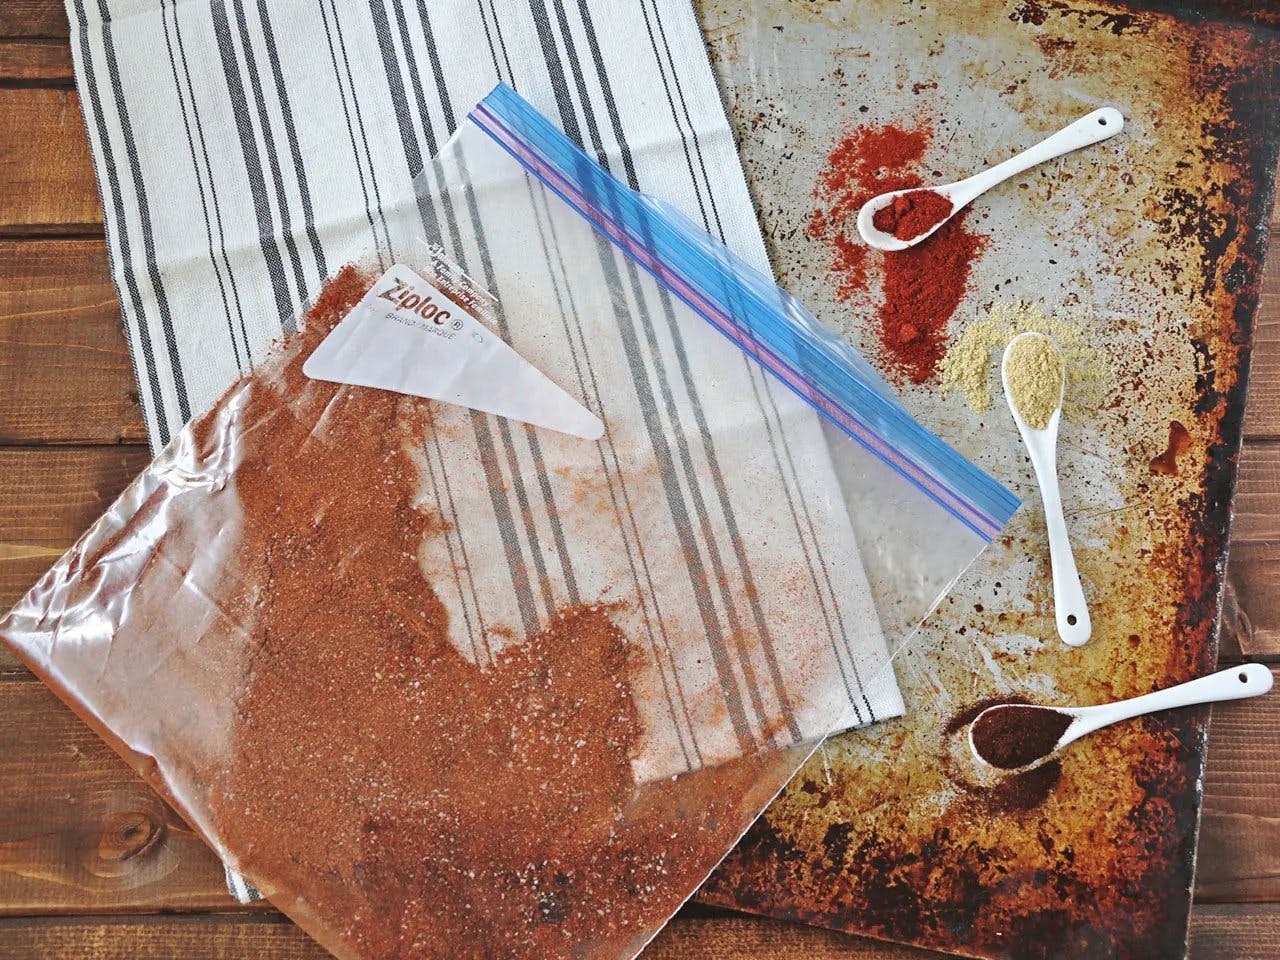 Smoked paprika in Ziplog bag with teaspoons of spices